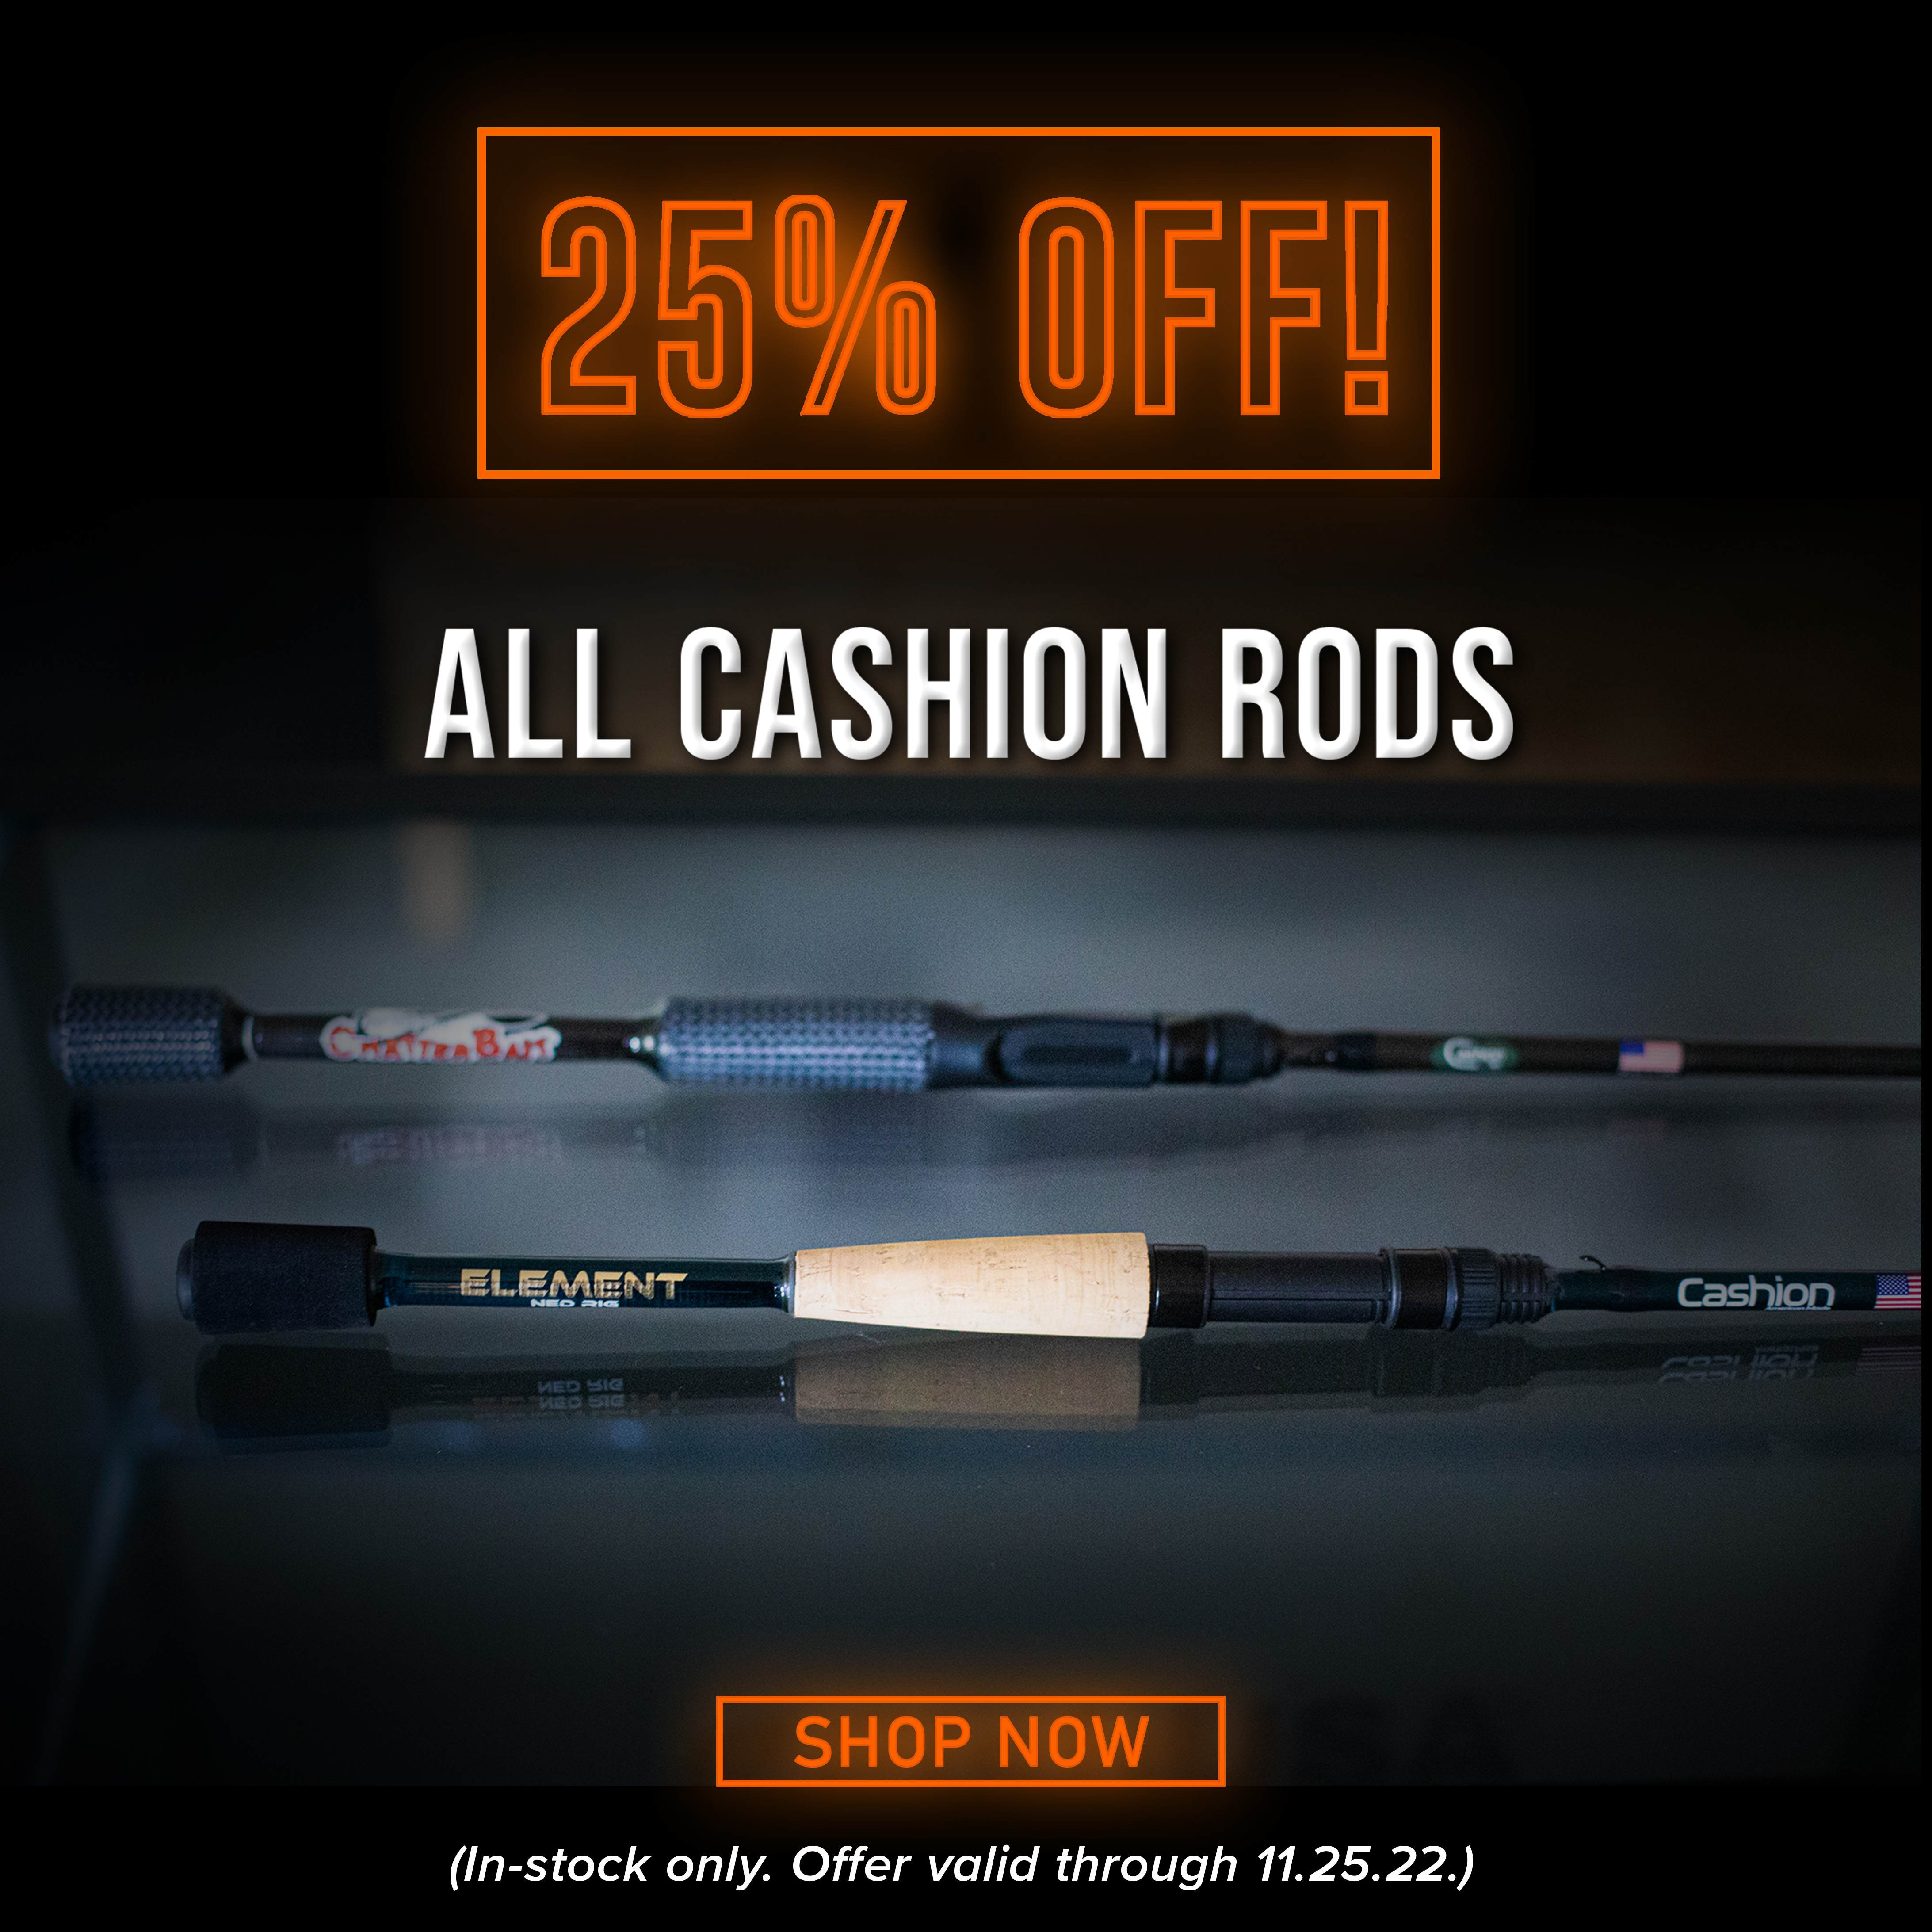 🍗Feast On All Cashion Rods 25% Off!🍗 - Fish USA